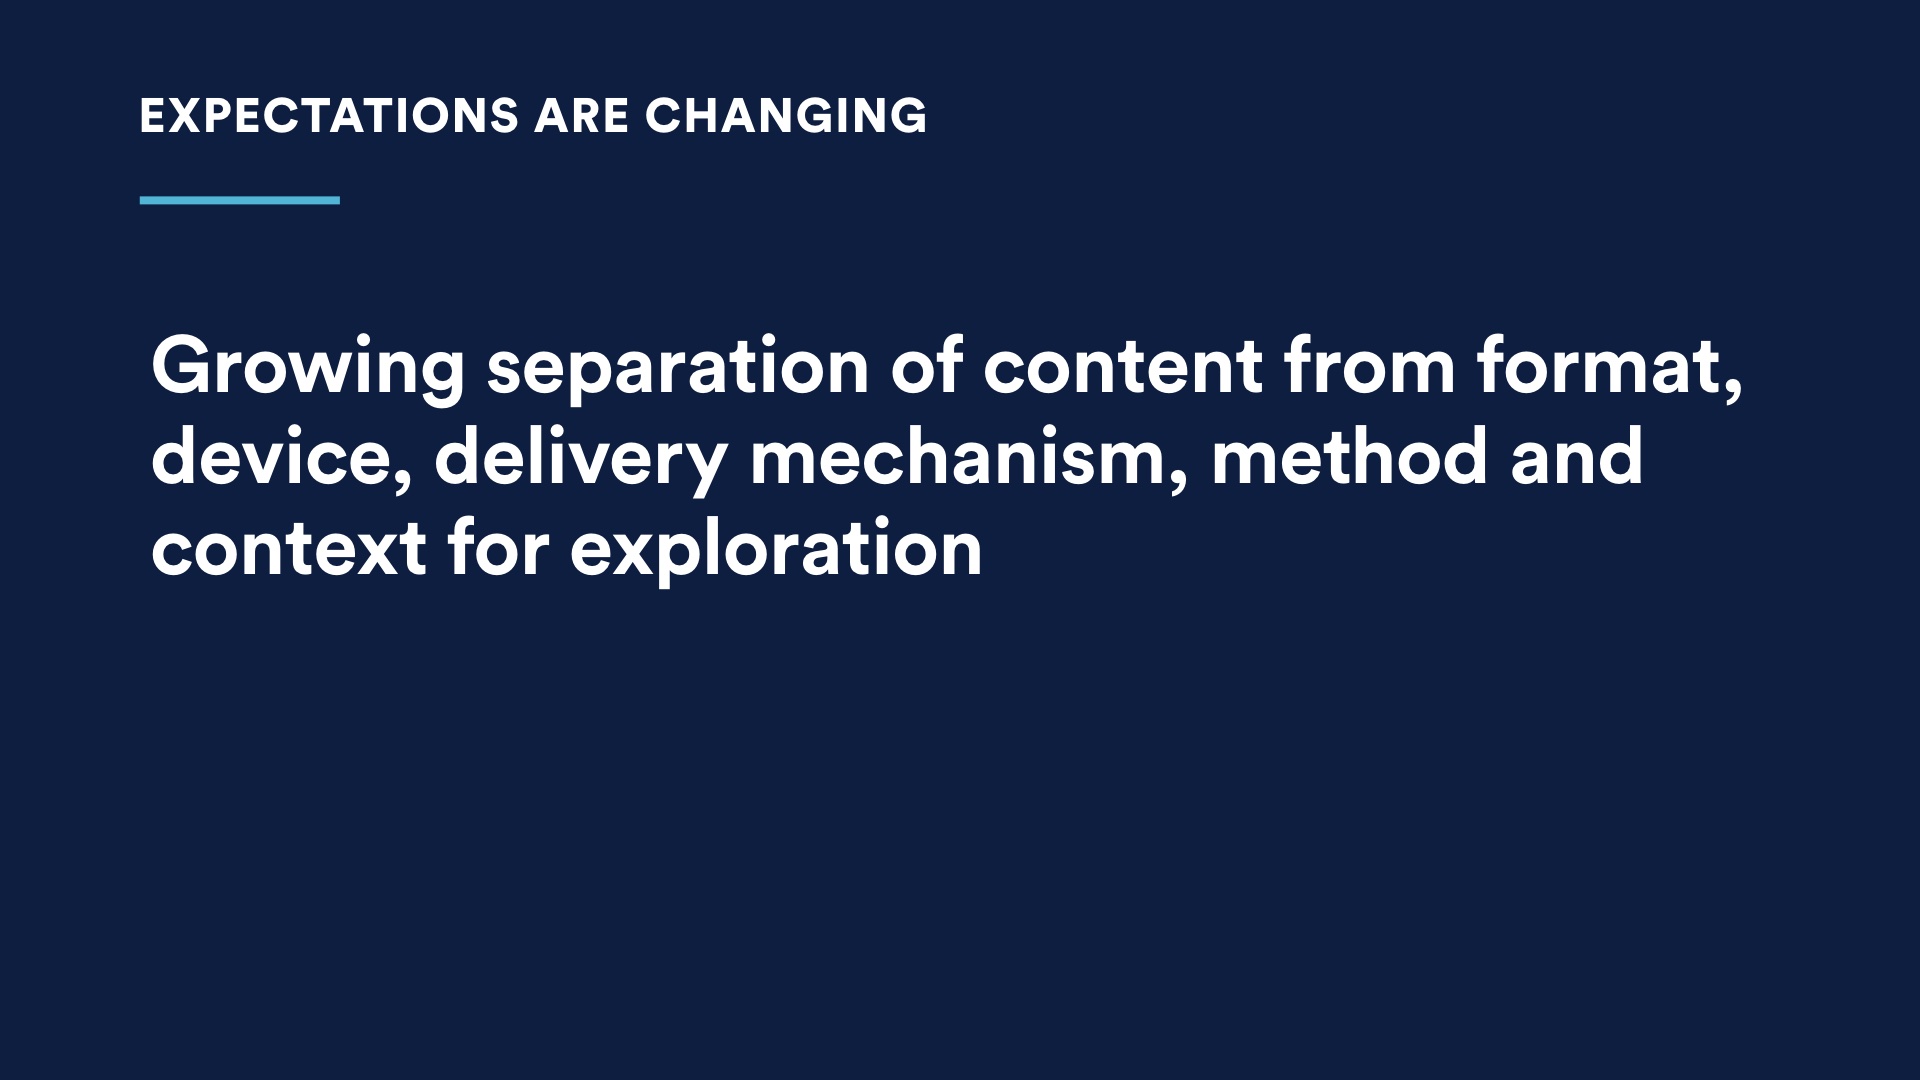 Slide image: Growing separation of content from format, device, delivery mechanism, method and context for exploration